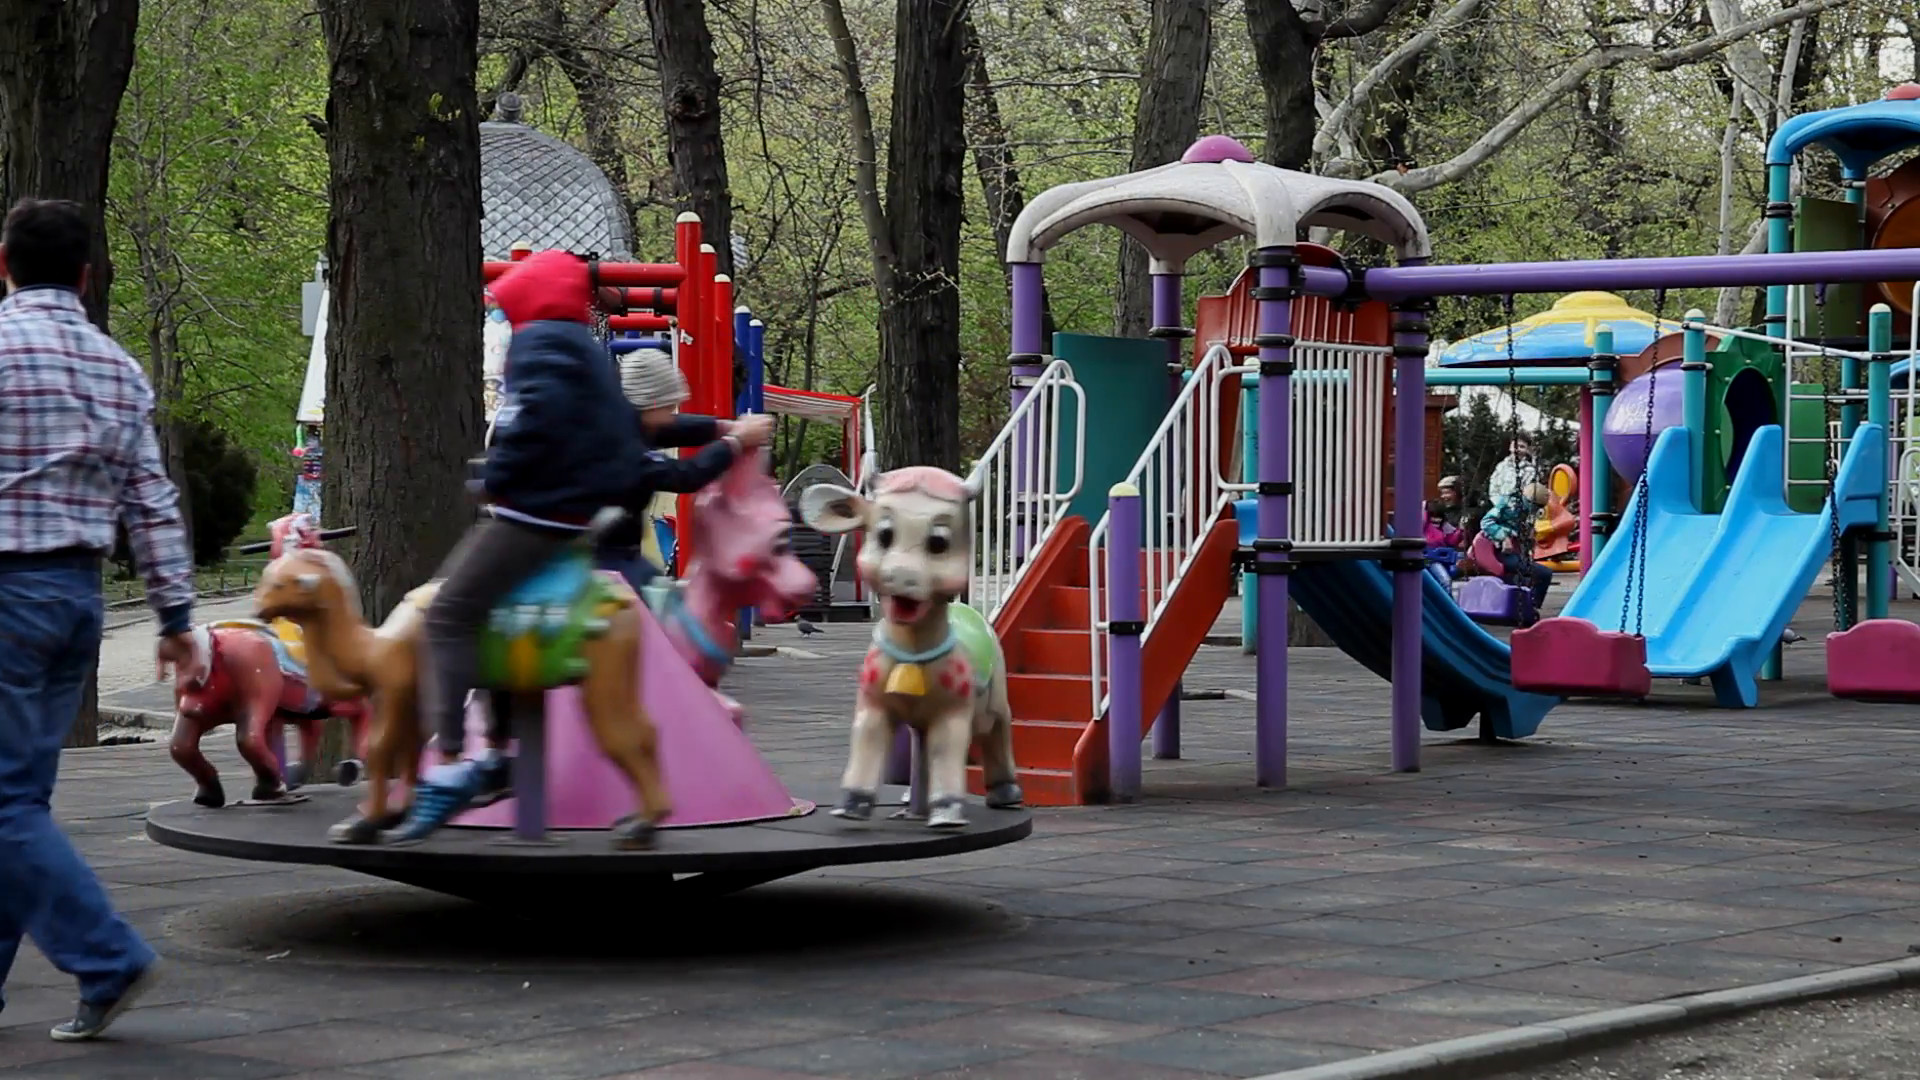 1920x1080 Children's playground, happy kids riding Merry go round, carousel, park;  Editorial use only Stock Video Footage - VideoBlocks